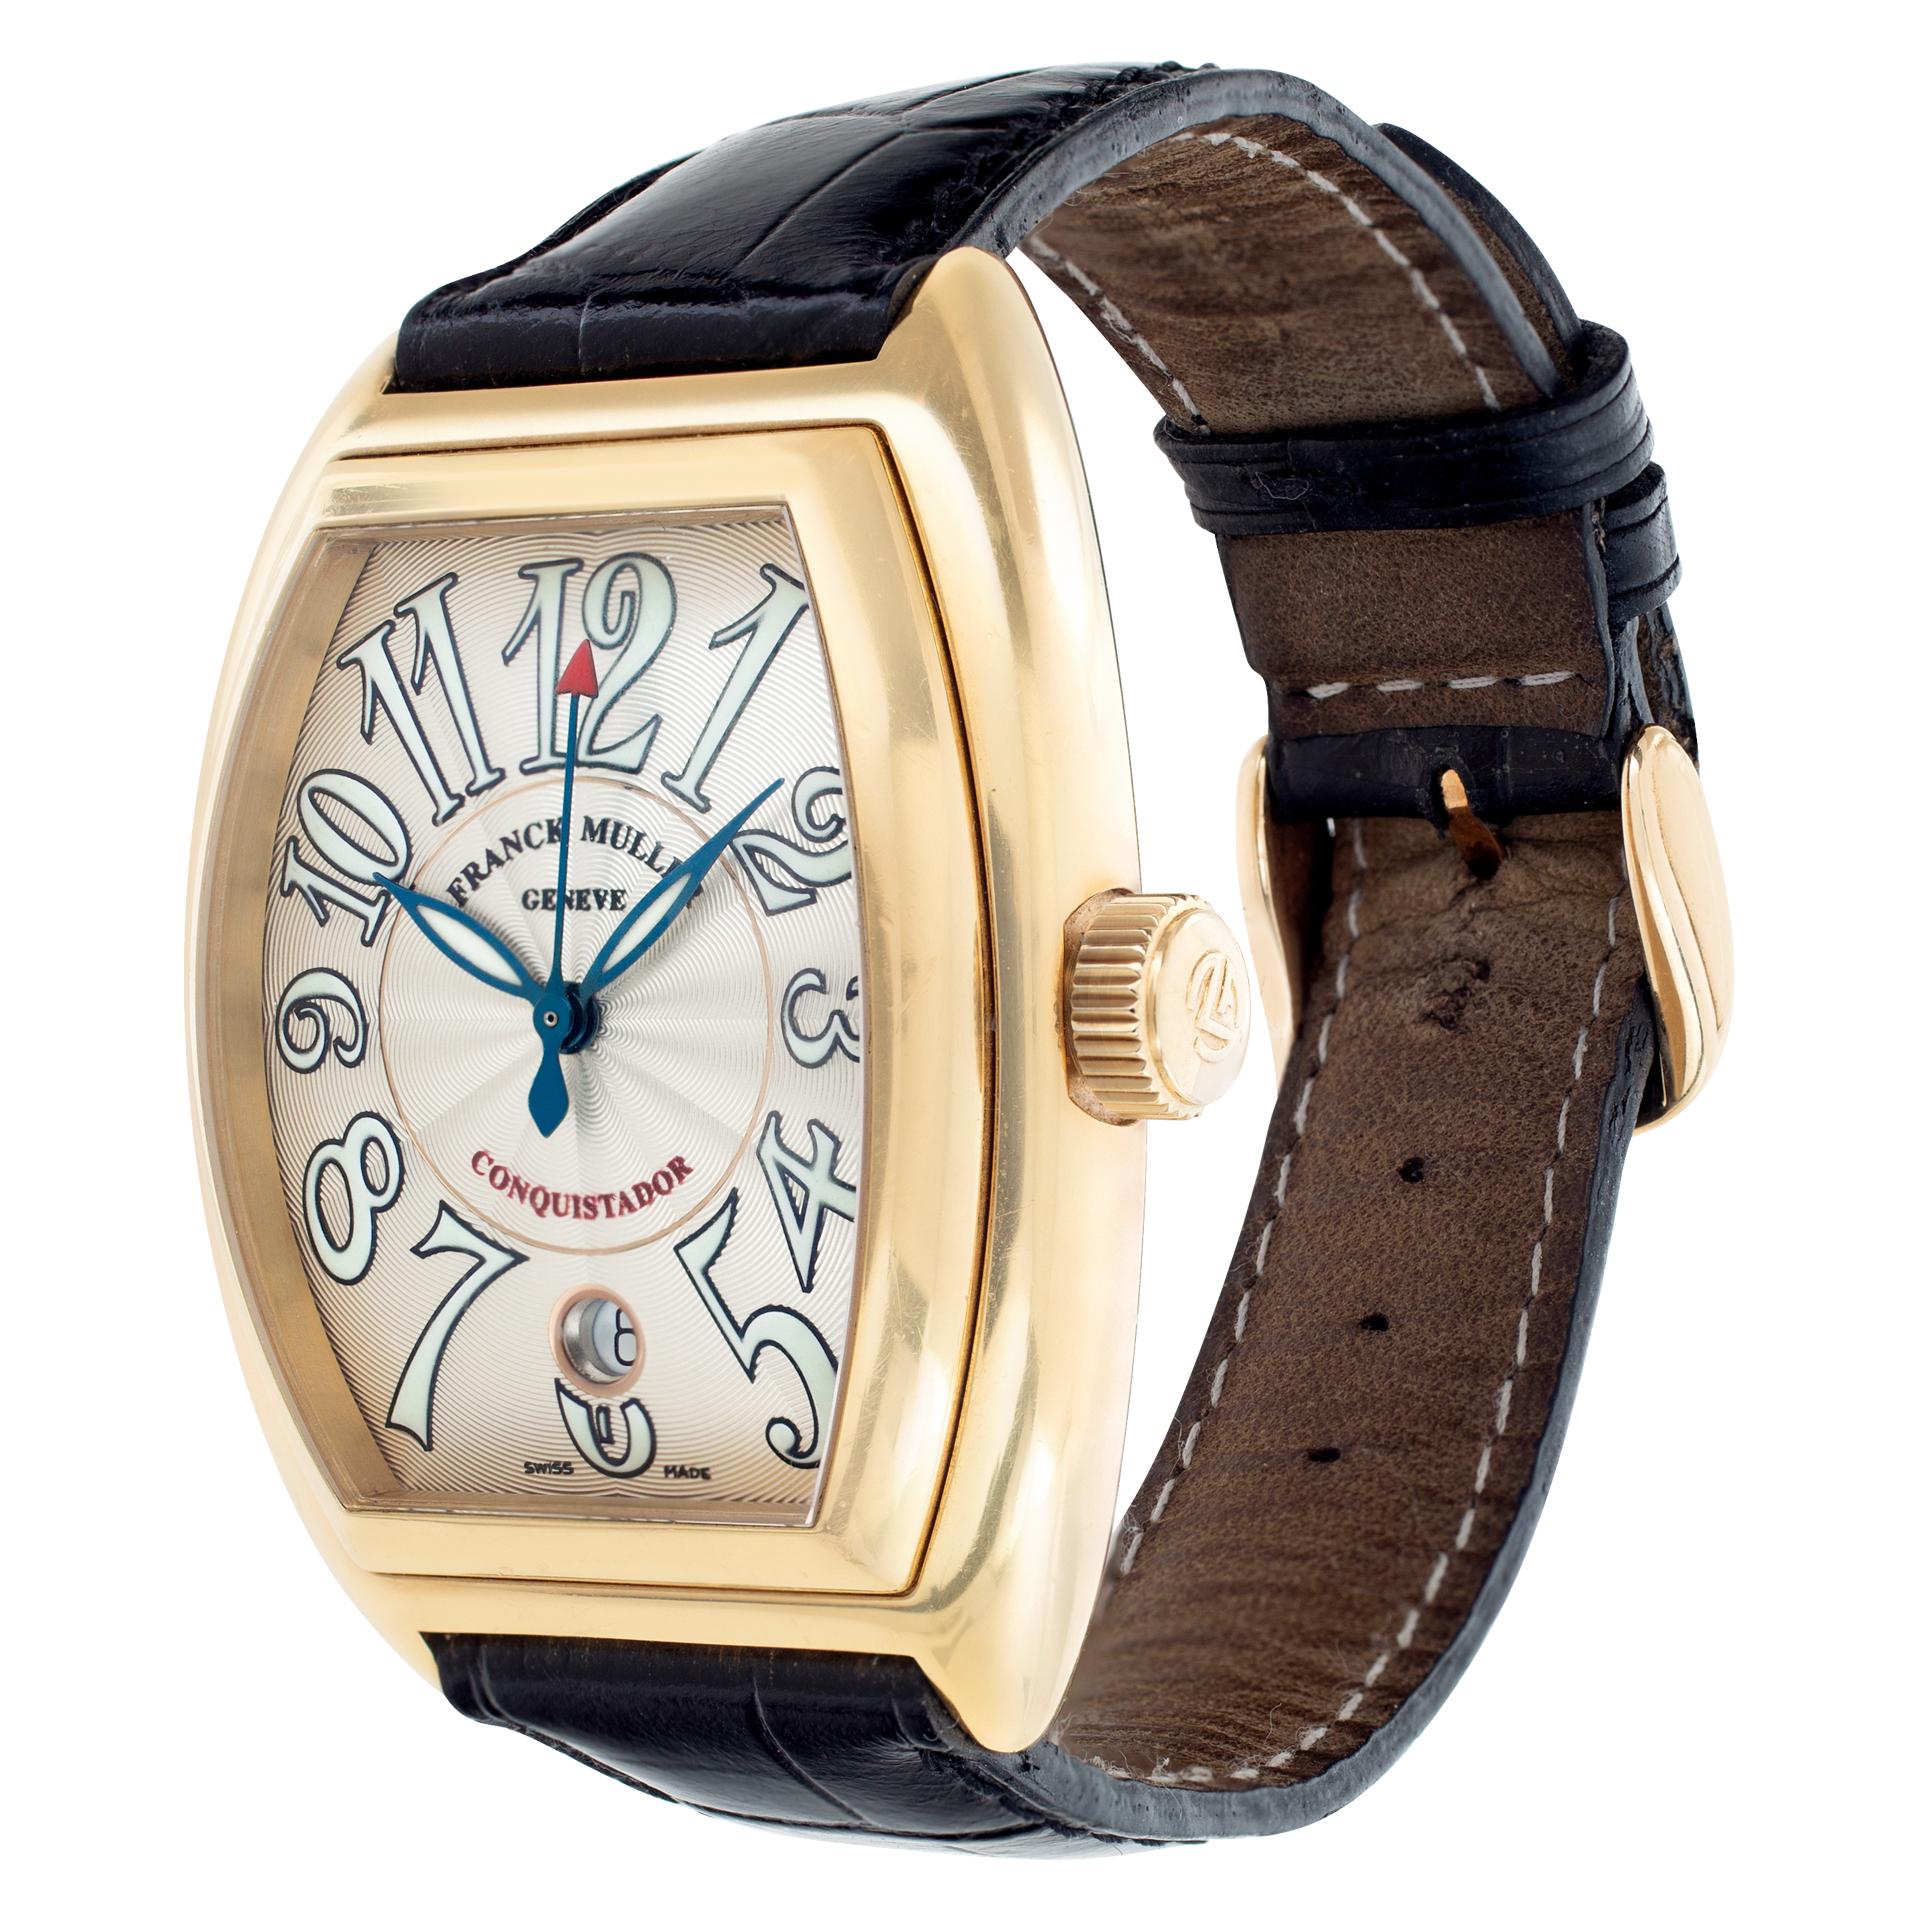 Franck Muller Conquistador in 18k on black alligator strap with 18k FM tang buckle. Auto w/ sweep seconds and date. 48 mm length (lug to lug) by 35 mm width case size. With box and papers. Ref 8001 SC. Fine Pre-owned Franck Muller Watch. Certified